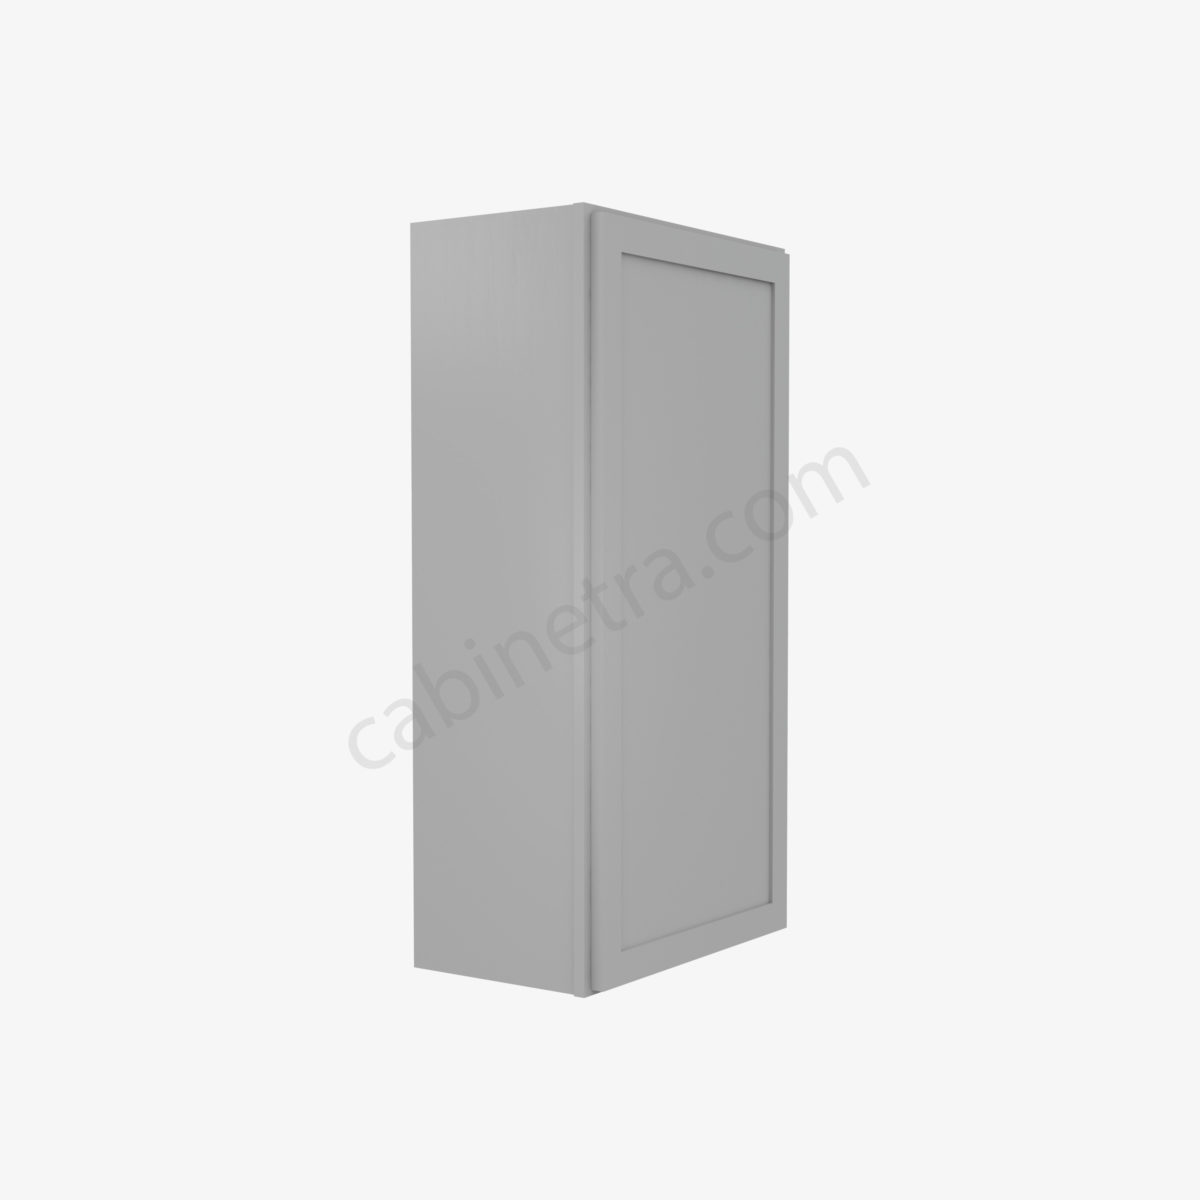 AB W2142 4 Forevermark Lait Gray Shaker Cabinetra scaled